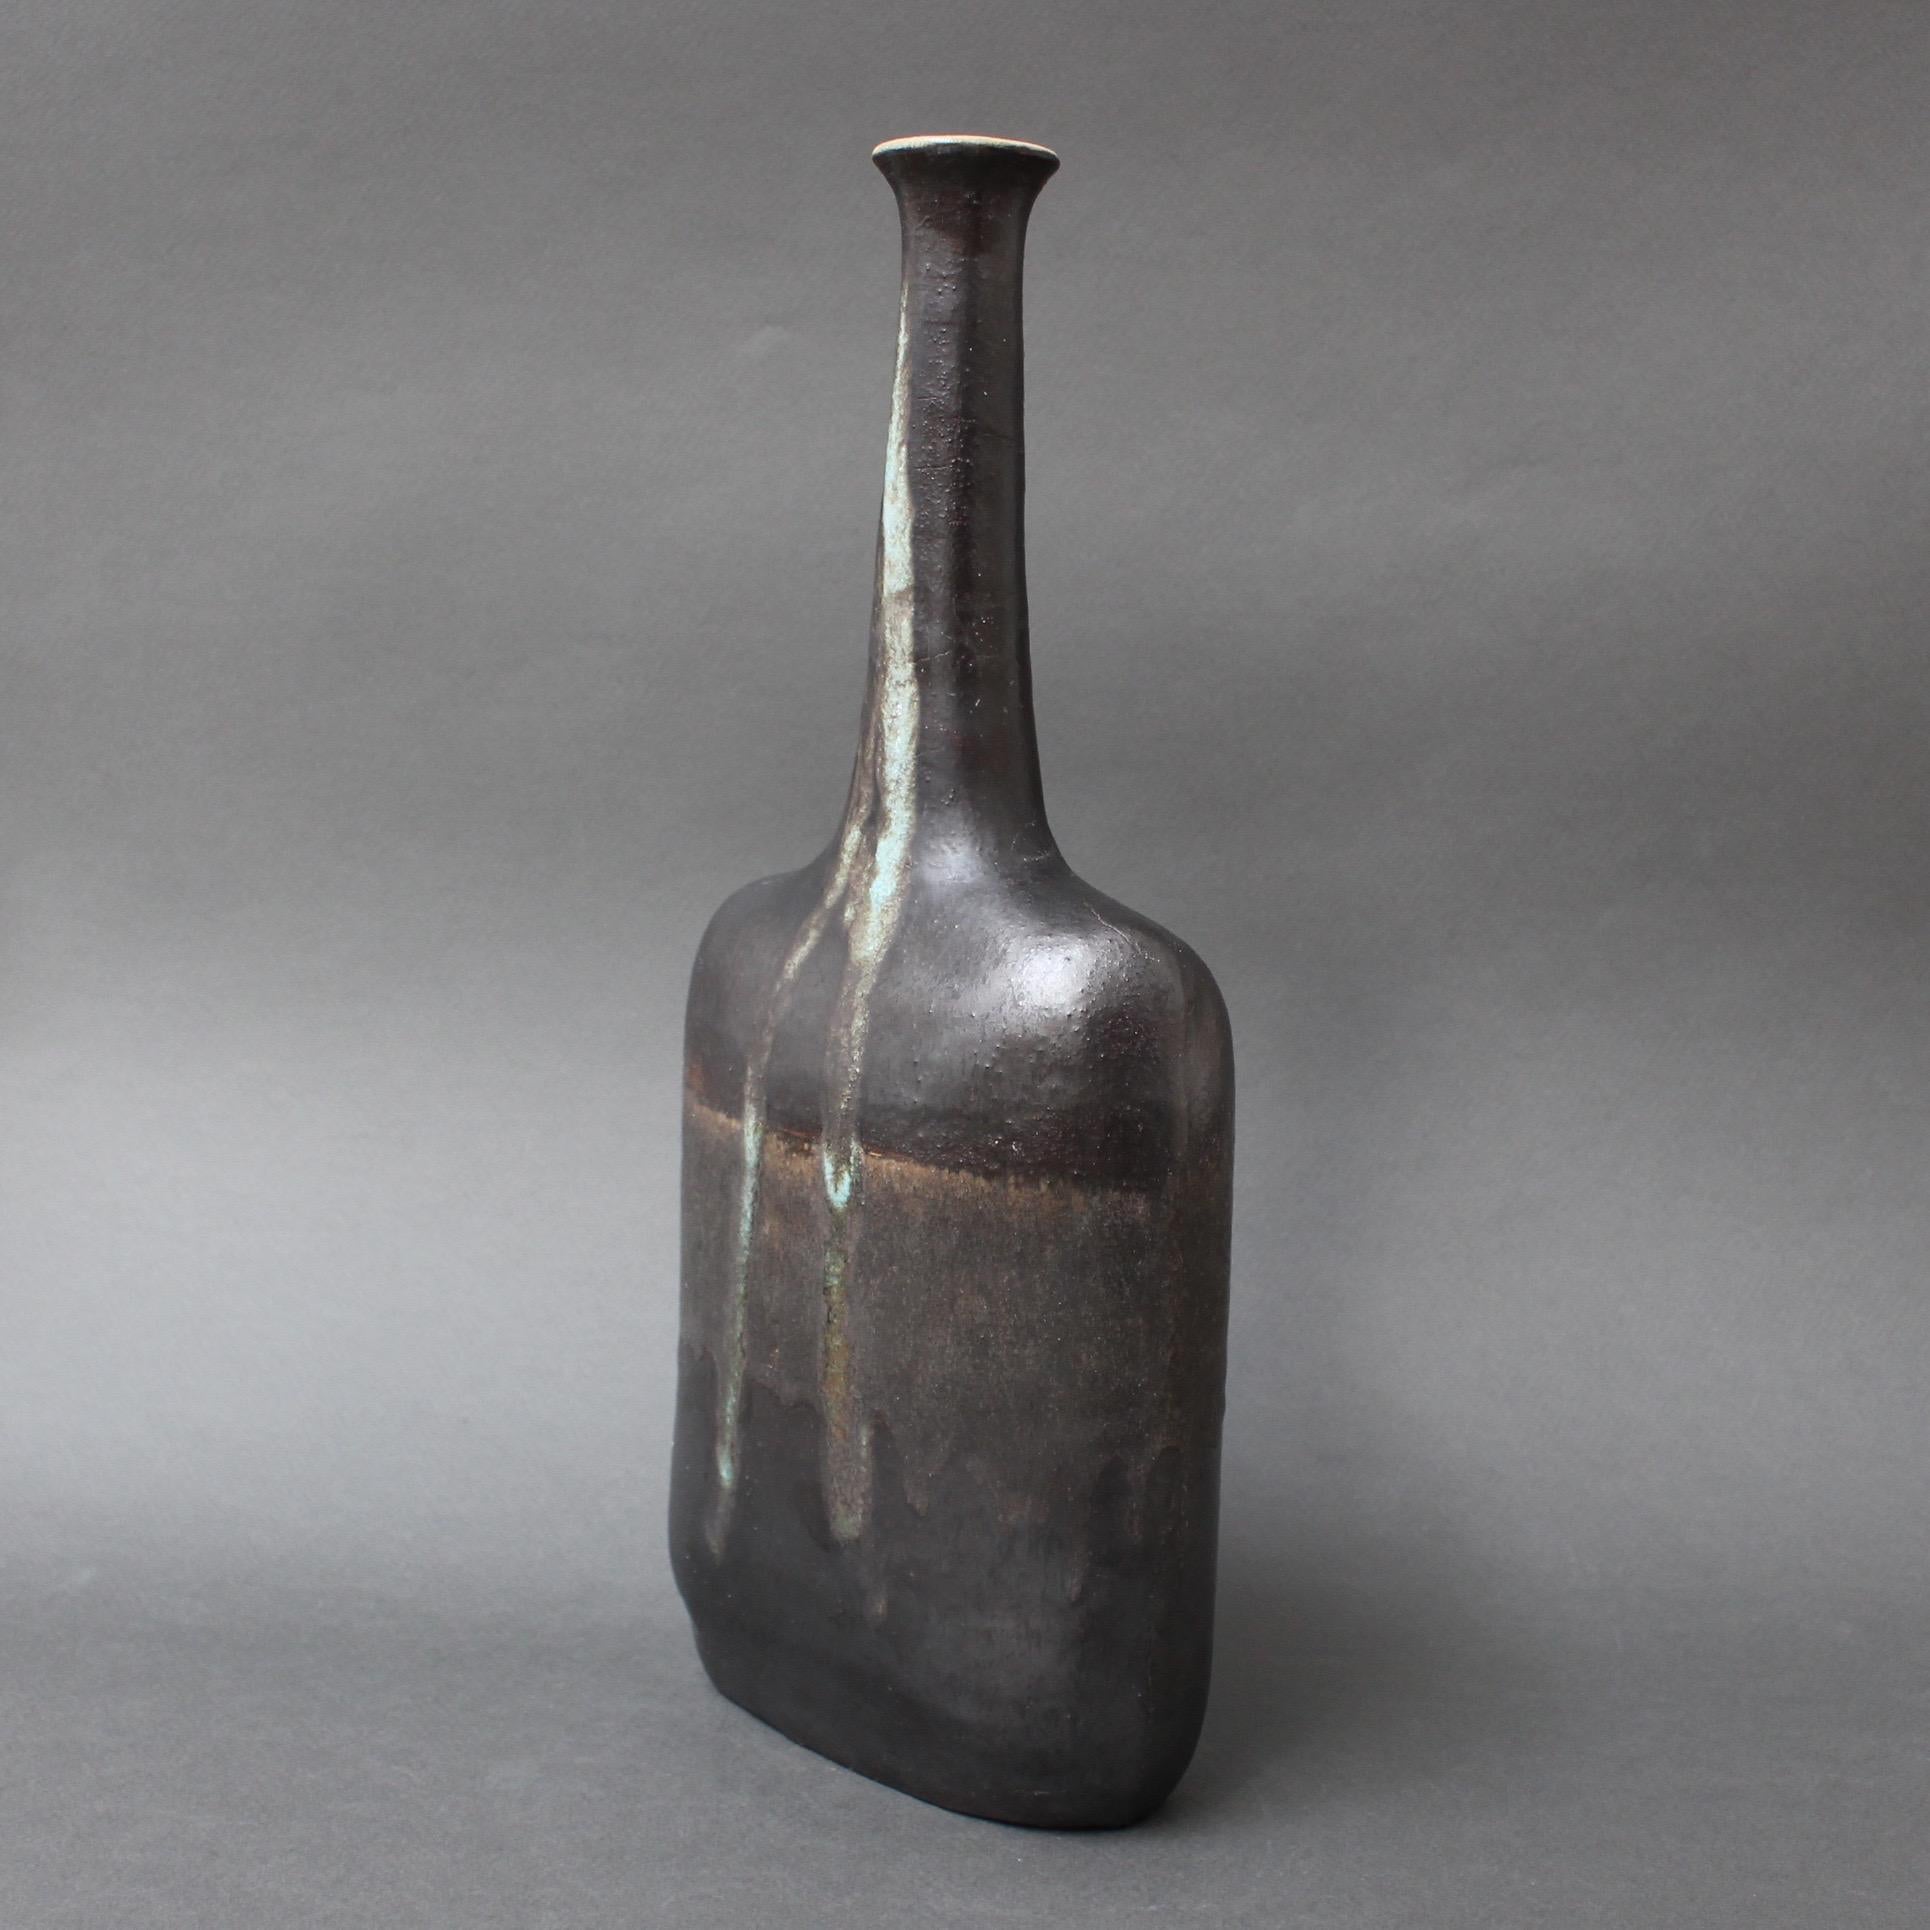 Ceramic vase with flat-black glaze and verdigris drip motif by ceramicist Bruno Gambone, (circa 1980s). This elegant narrow-opening bottle-shaped vase is a work of art. There is a rectangular body with soft, curvy shoulders leading to a graceful,